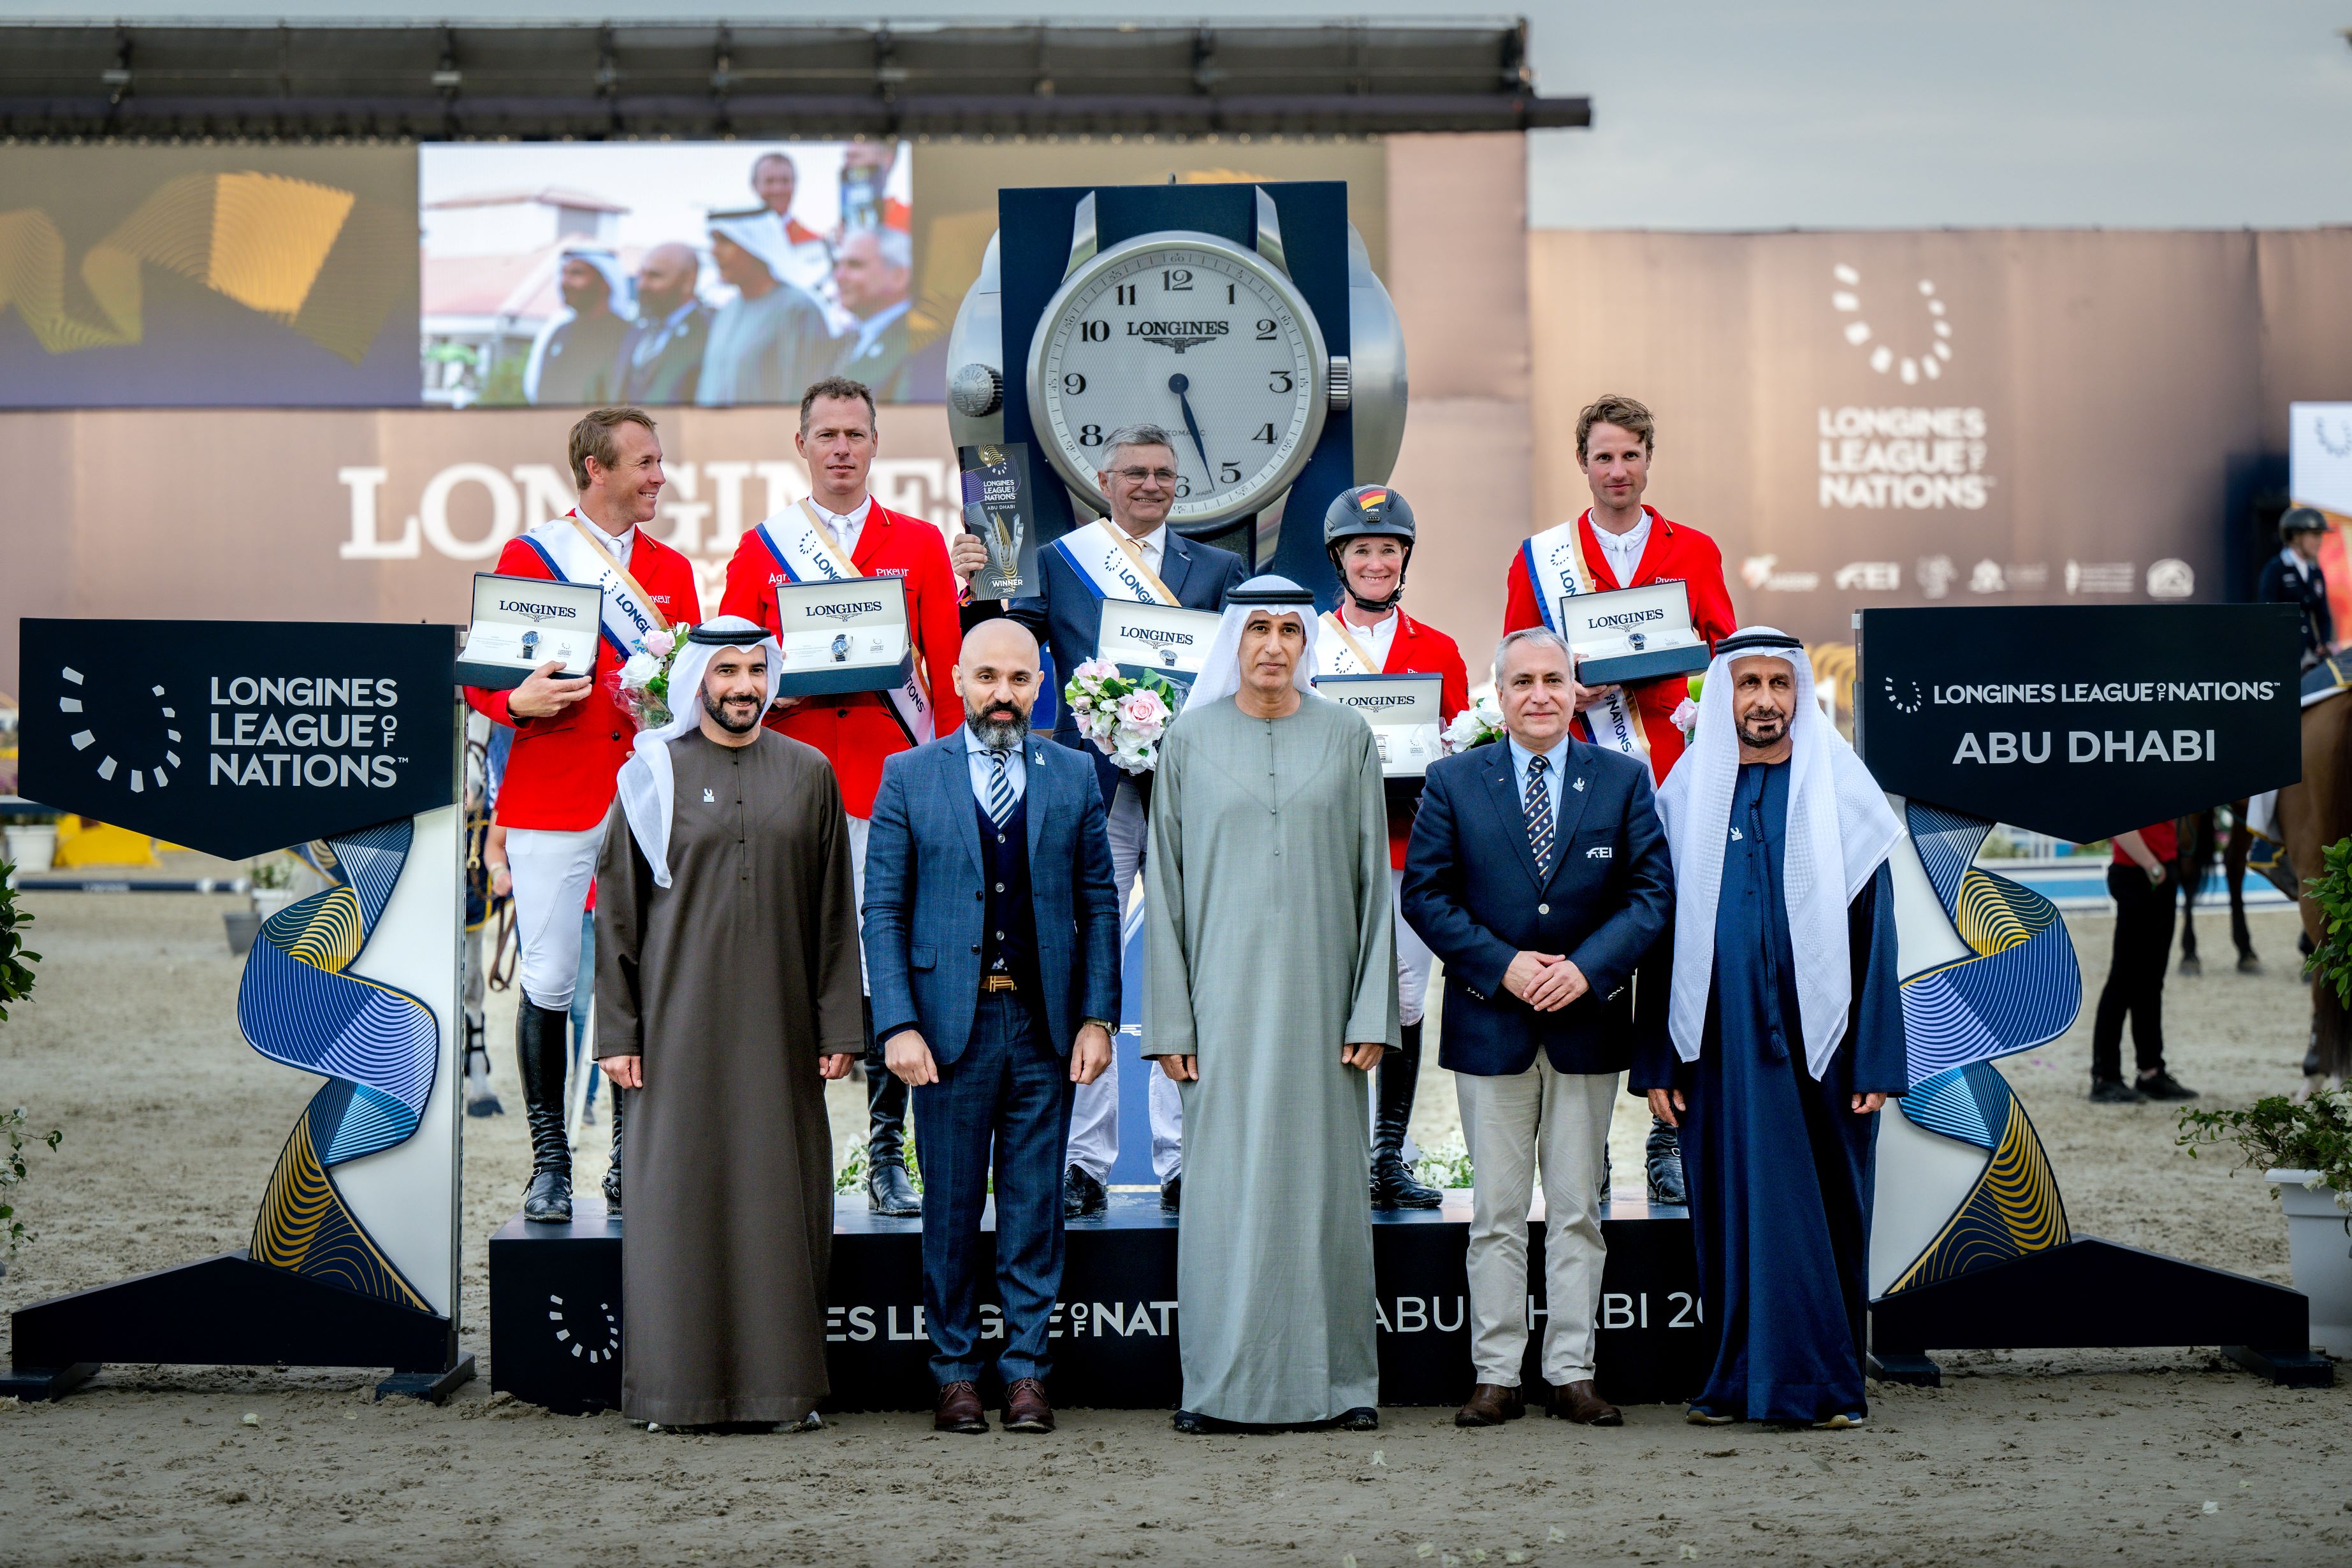 Germany wins first Longines Nations League of the season!